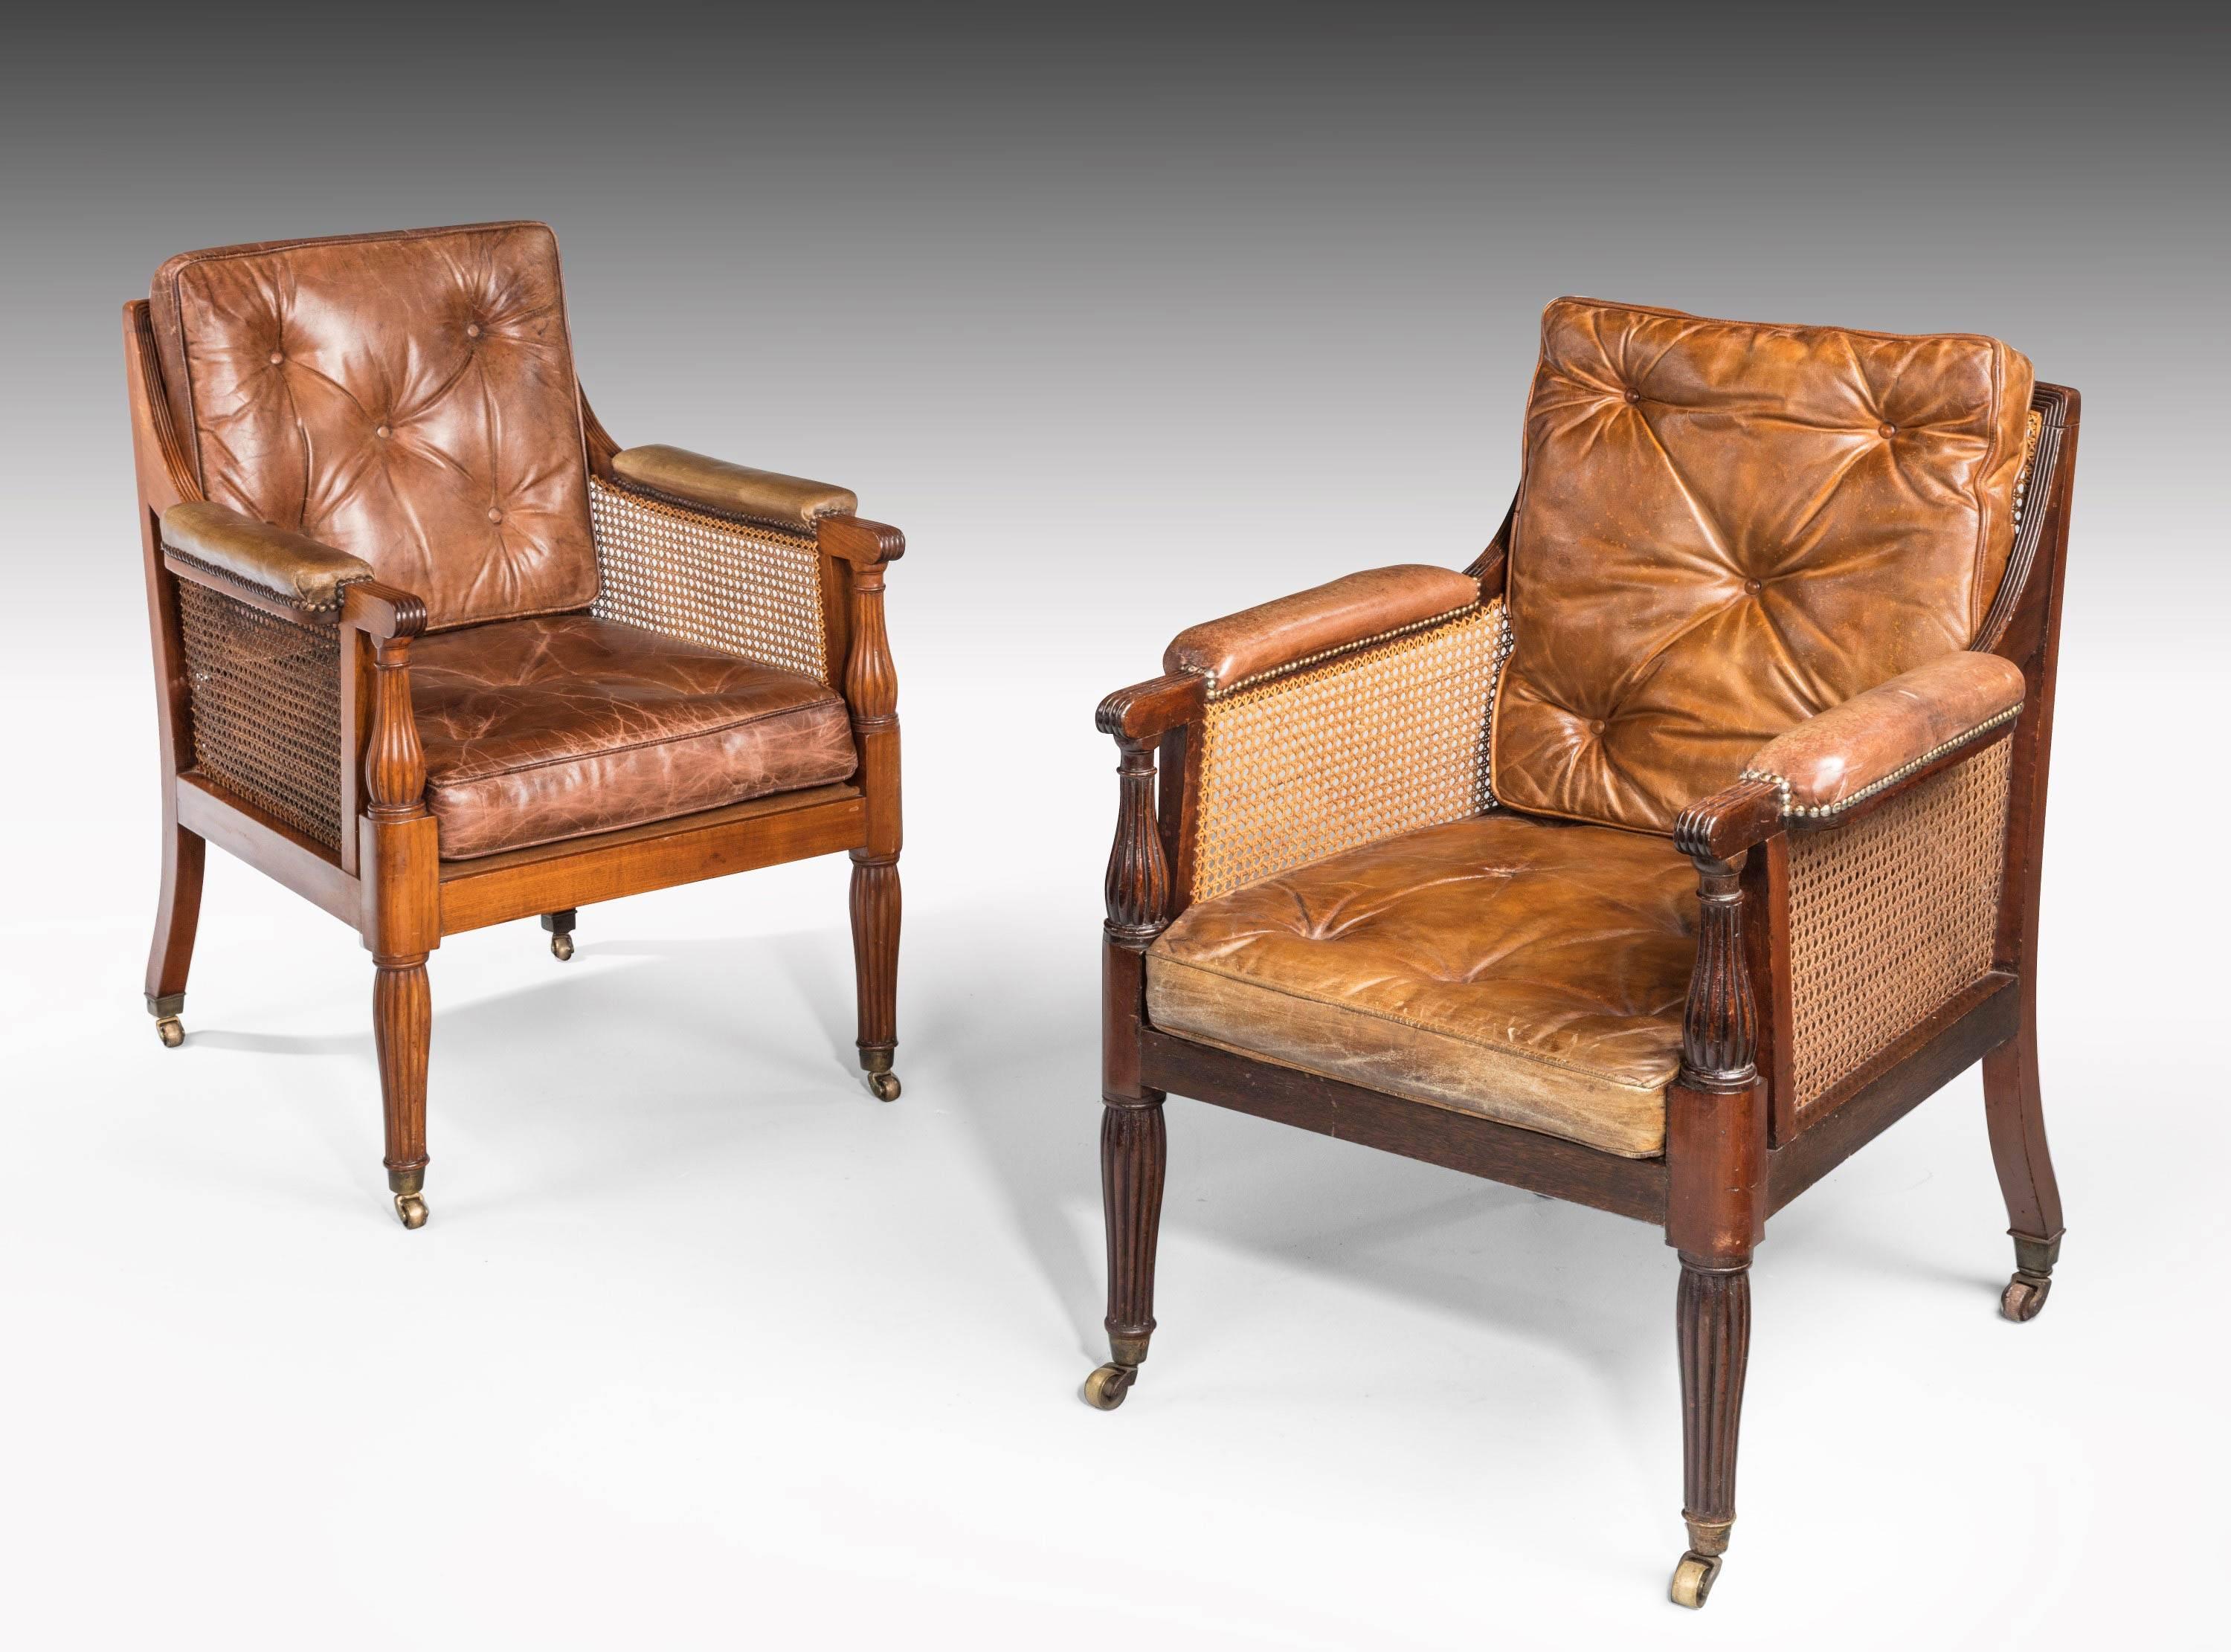 A exceptionally fine and original pair of Regency period bergere armchairs. Retaining the original canework. Of generous size. Totally unrestored condition including the polish.